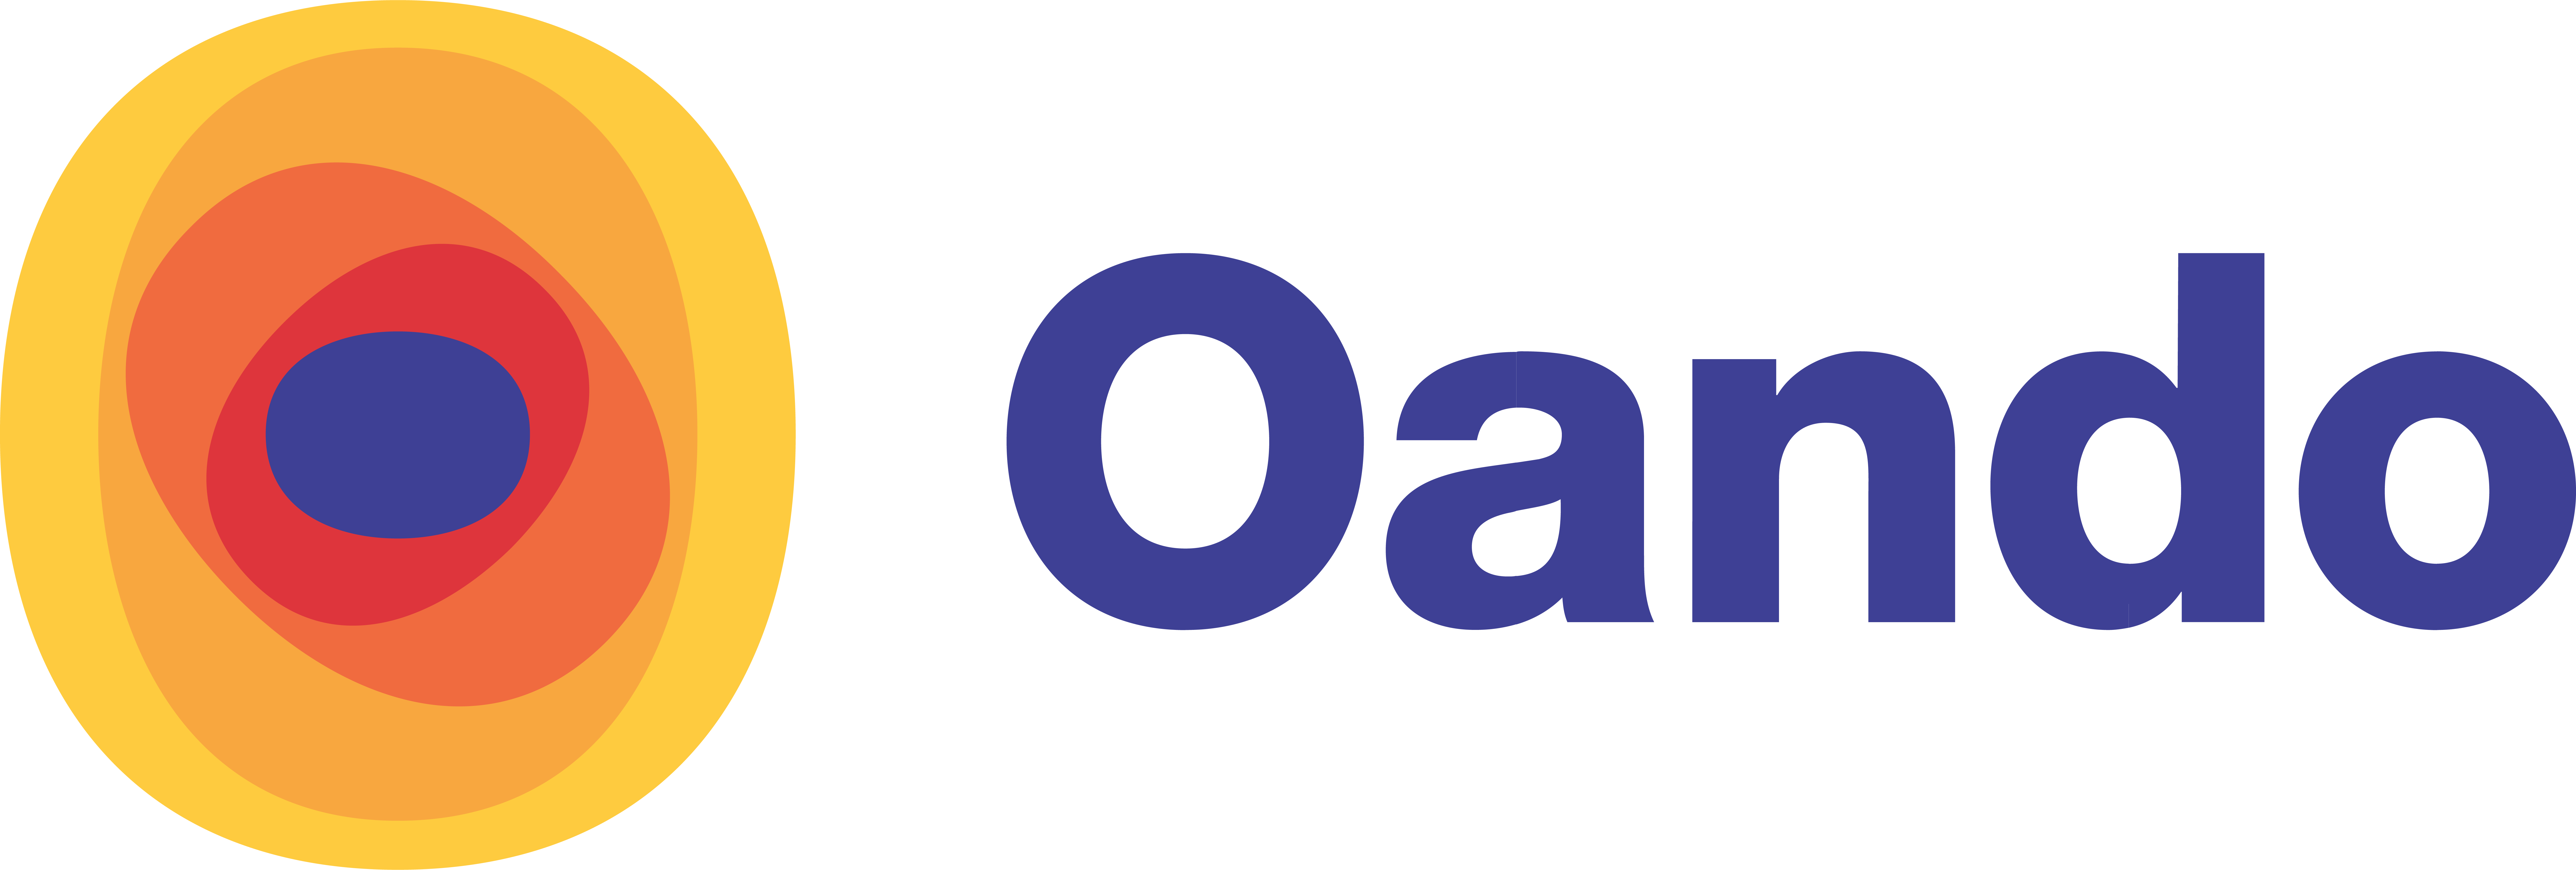 OANDO PLC ANNOUNCES FULL YEAR END 2020 RESULTS